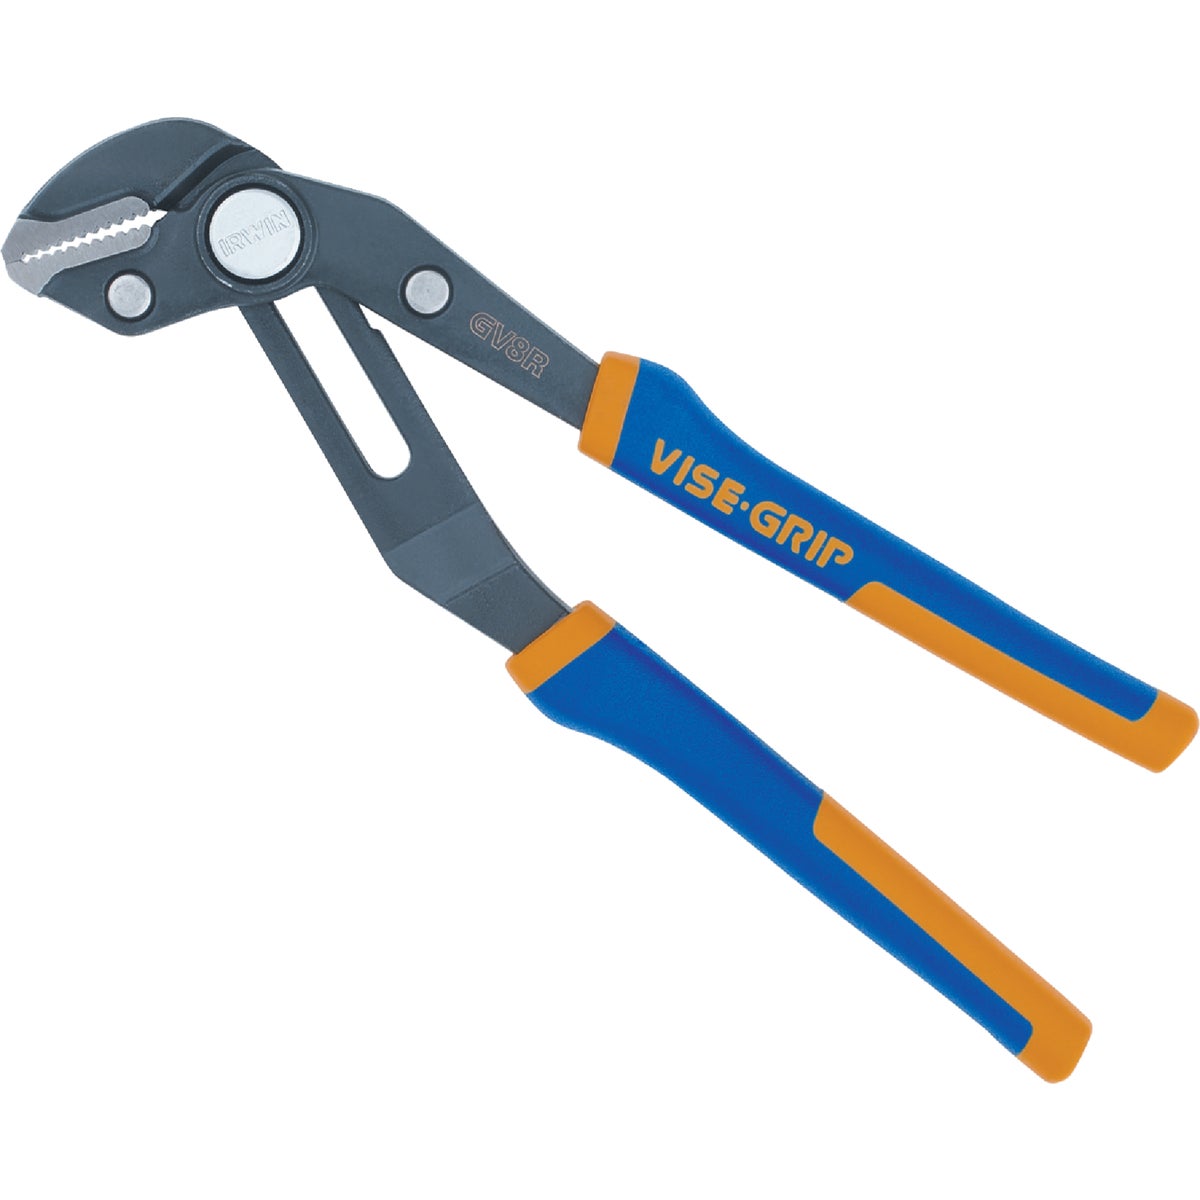 Irwin Vise-Grip 8 In. Straight Jaw GrooveLock Groove Joint Pliers